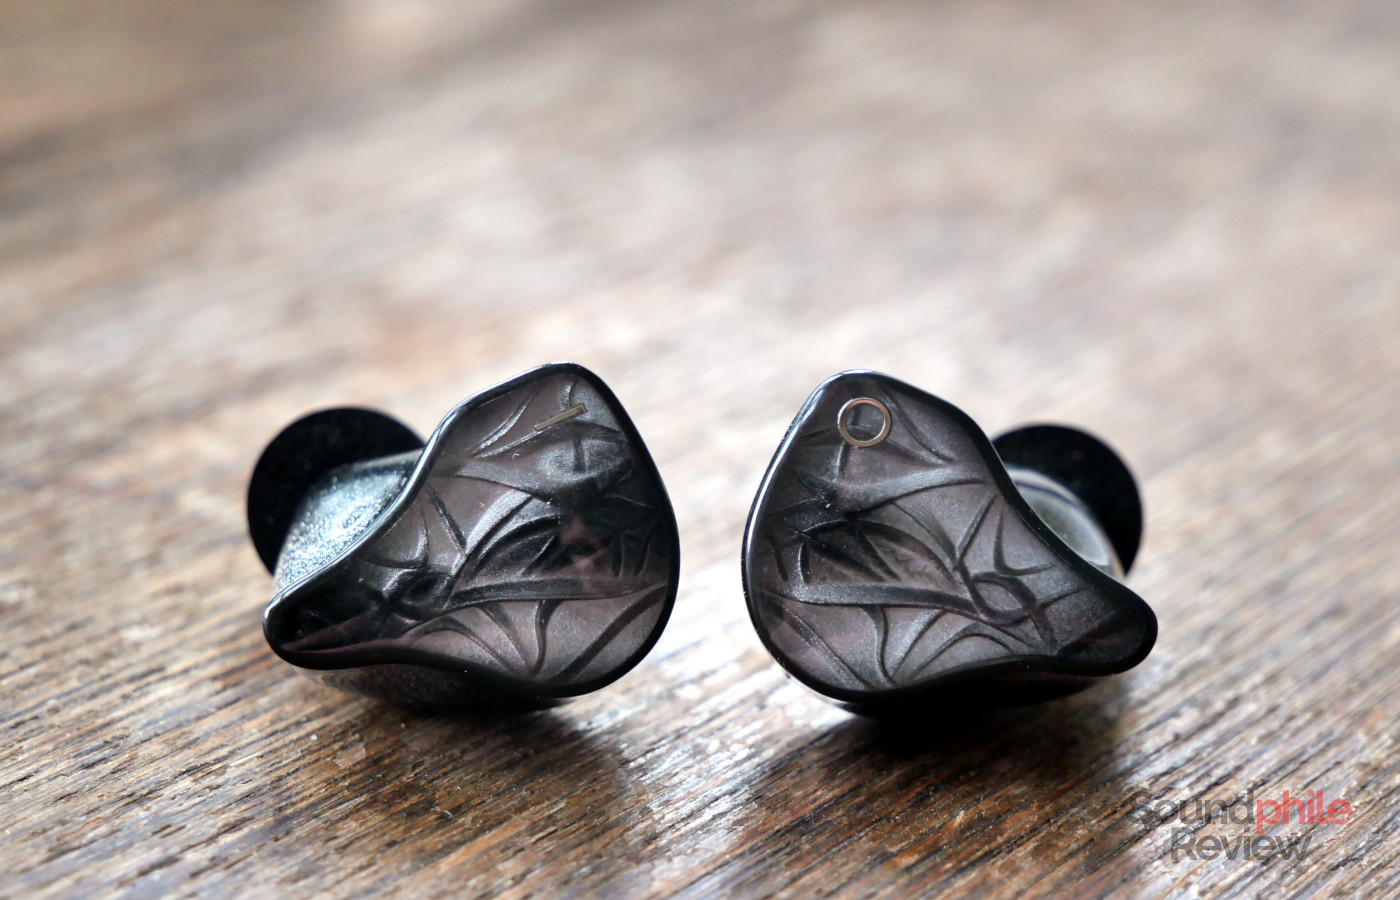 The IO Audio VOLARE have "I" and "O" letters on the right and left faceplates.